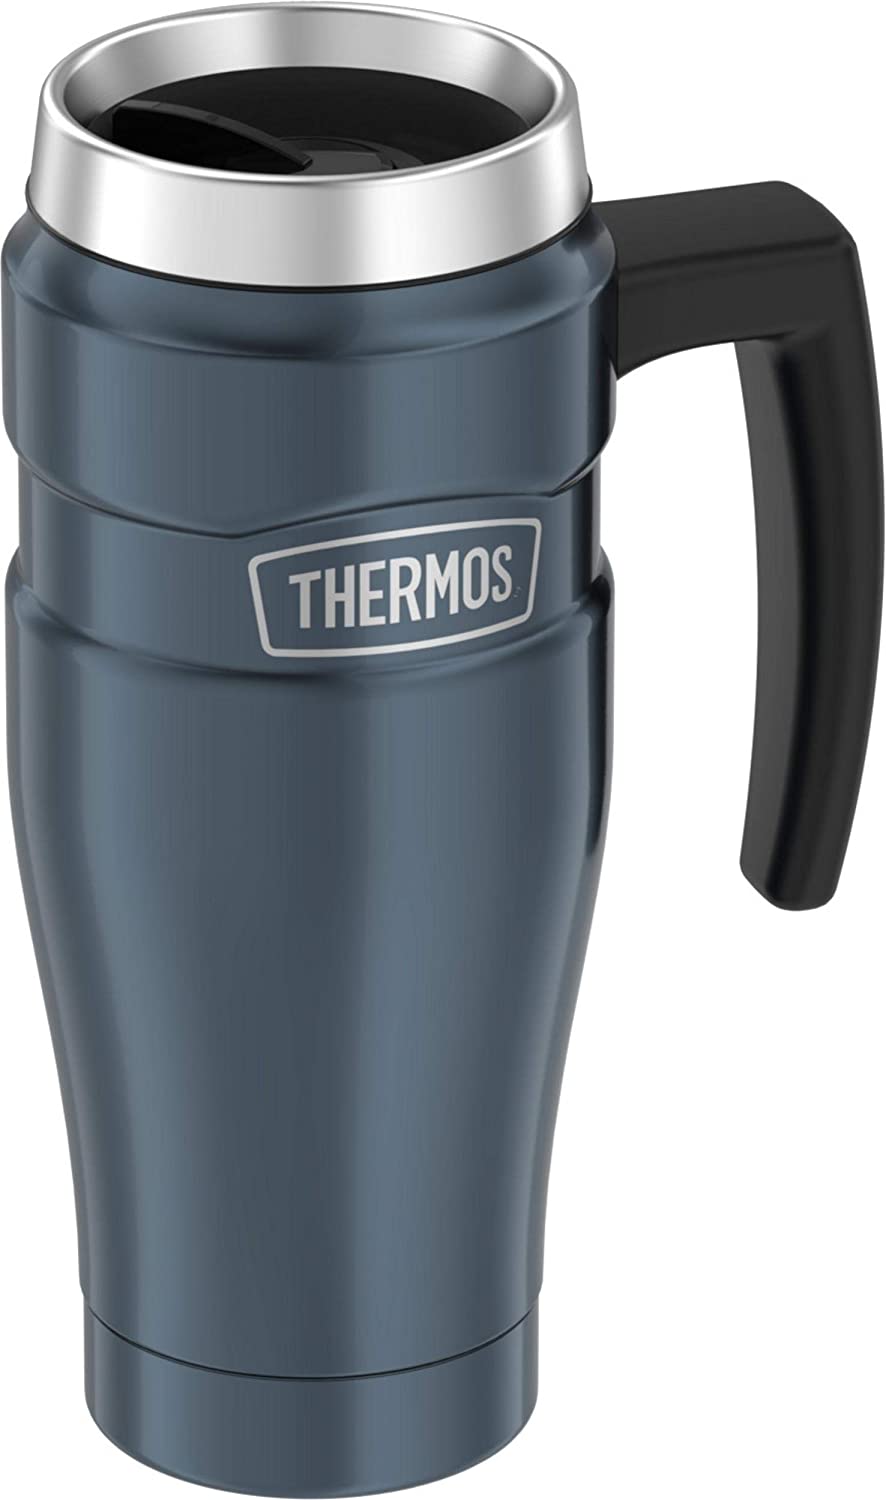 Thermos Hot/Cold Travel Coffee Mug, 16-Ounce